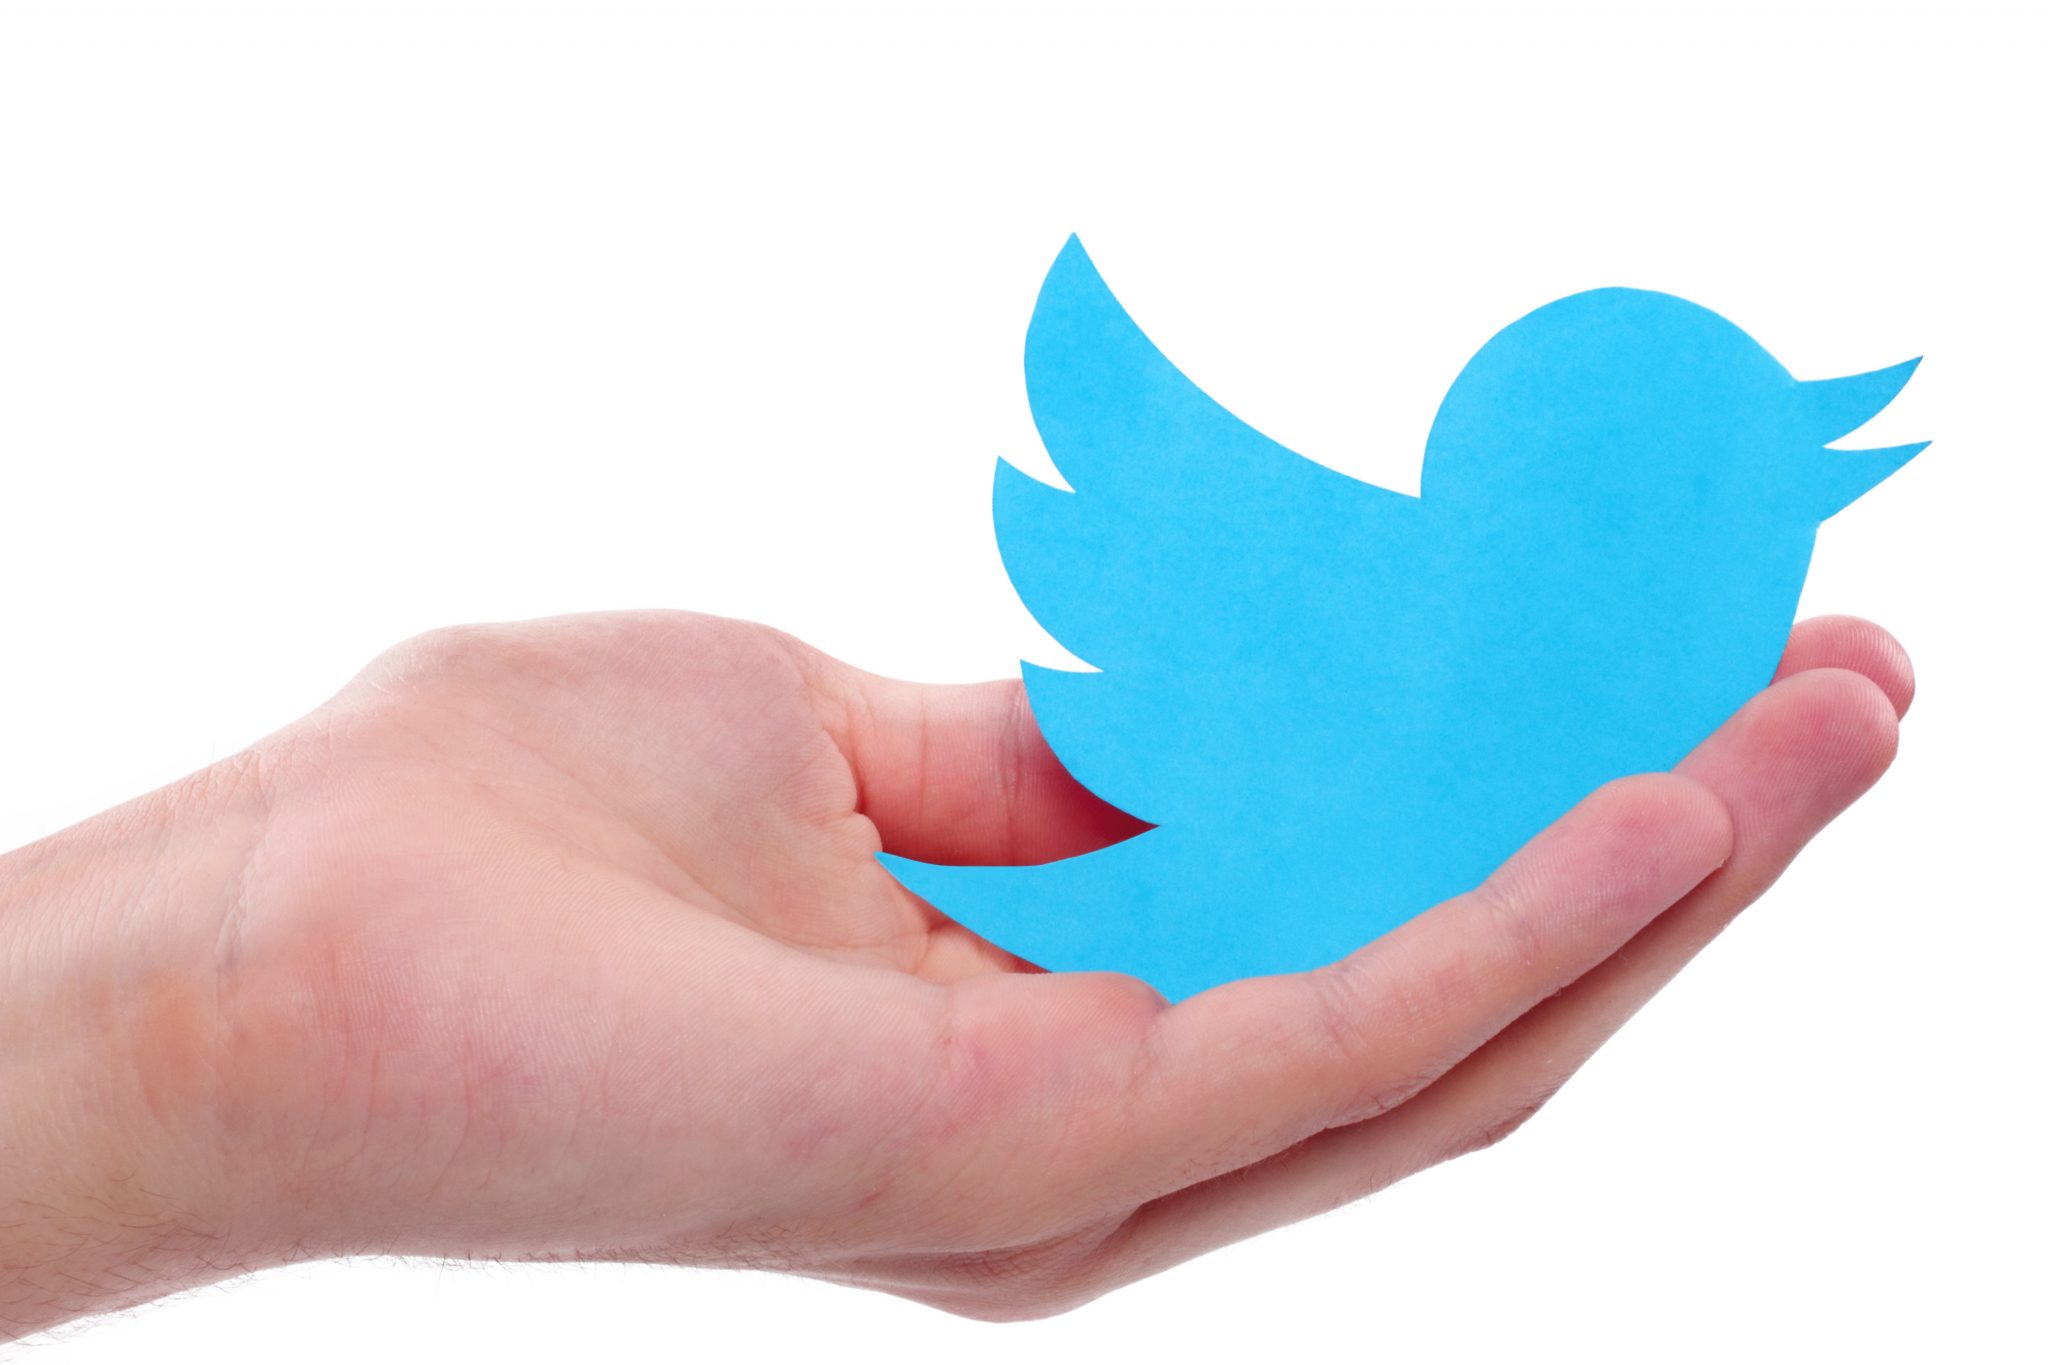 Twitter Provides Recommendations to Help Advertisers Prepare for Coming IDFA Change